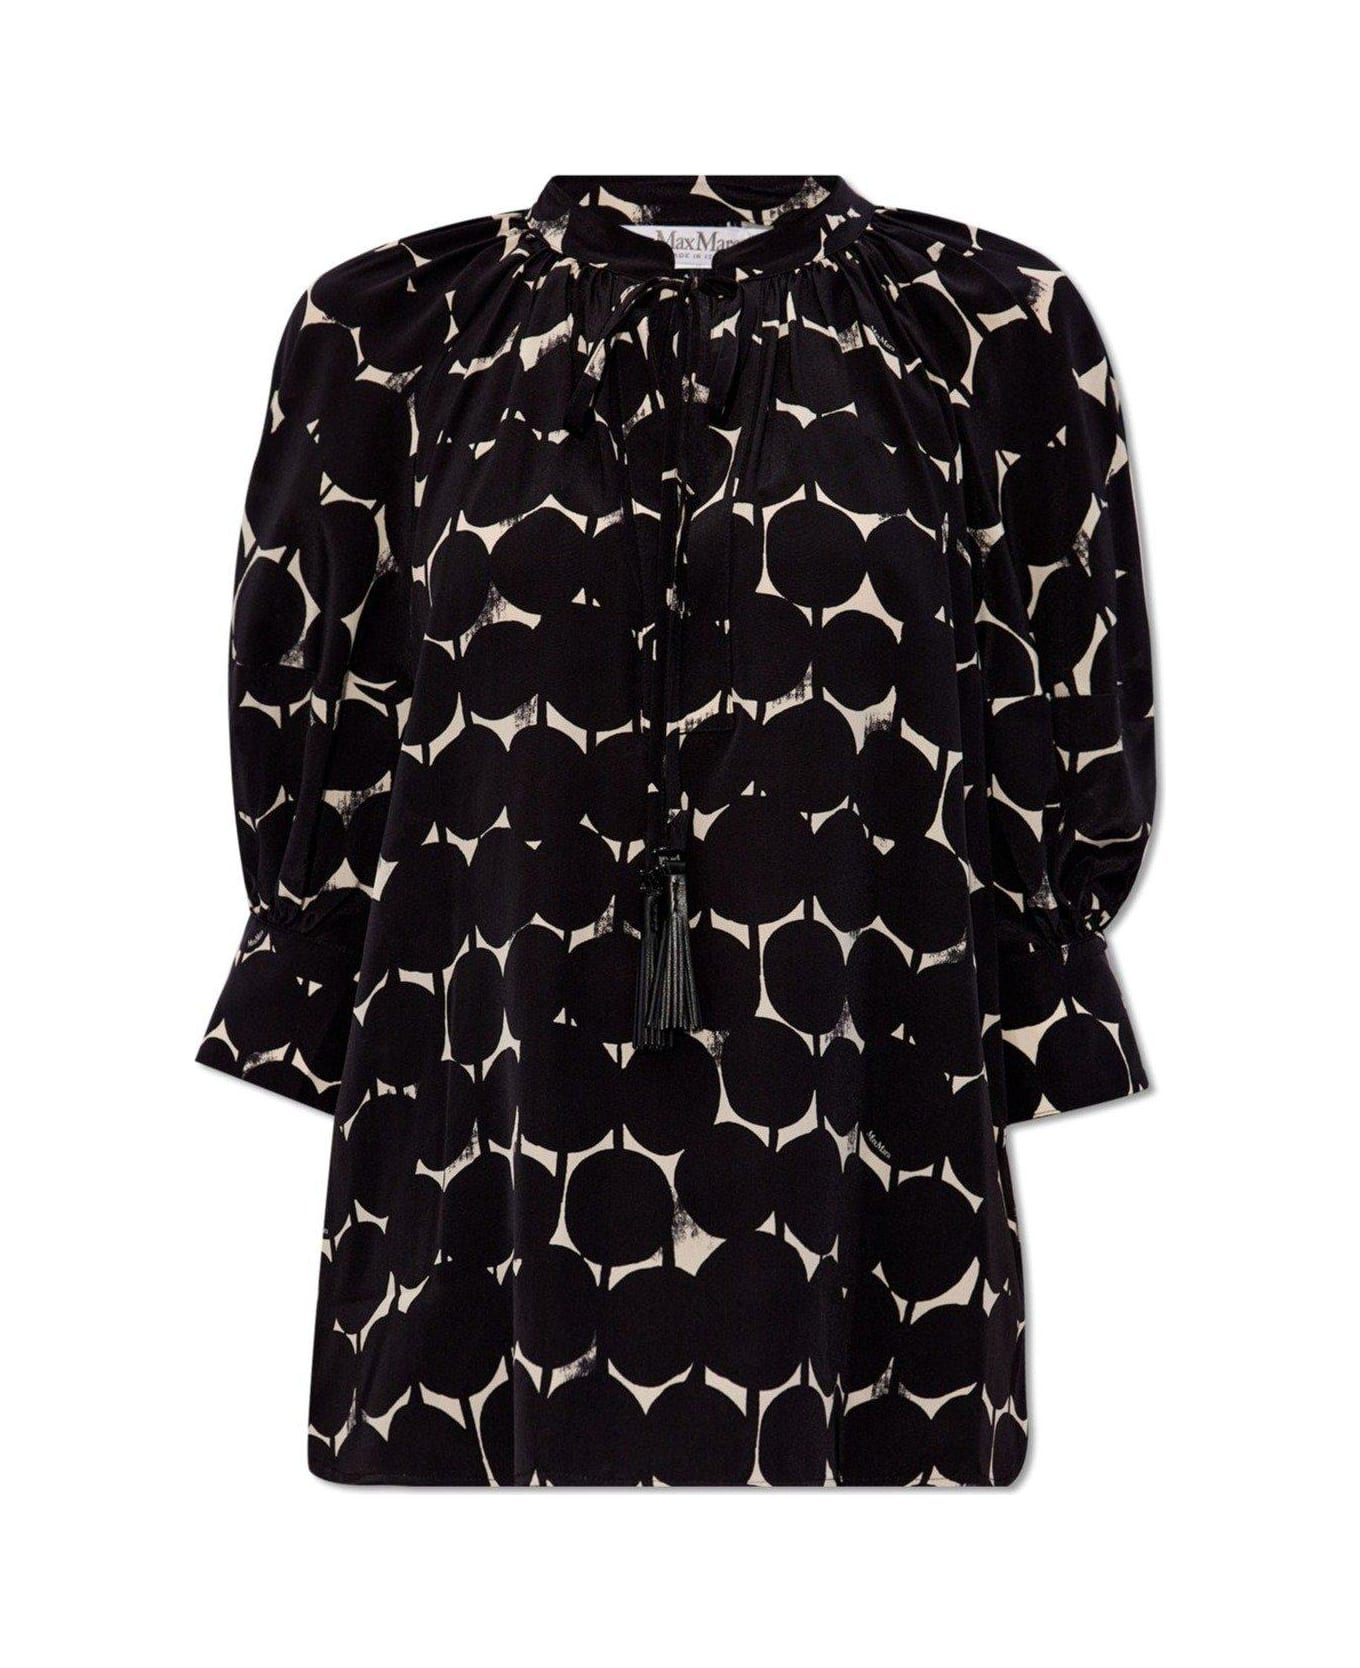 Max Mara Emy All-over Patterned Drawstring Top - Bianco/nero